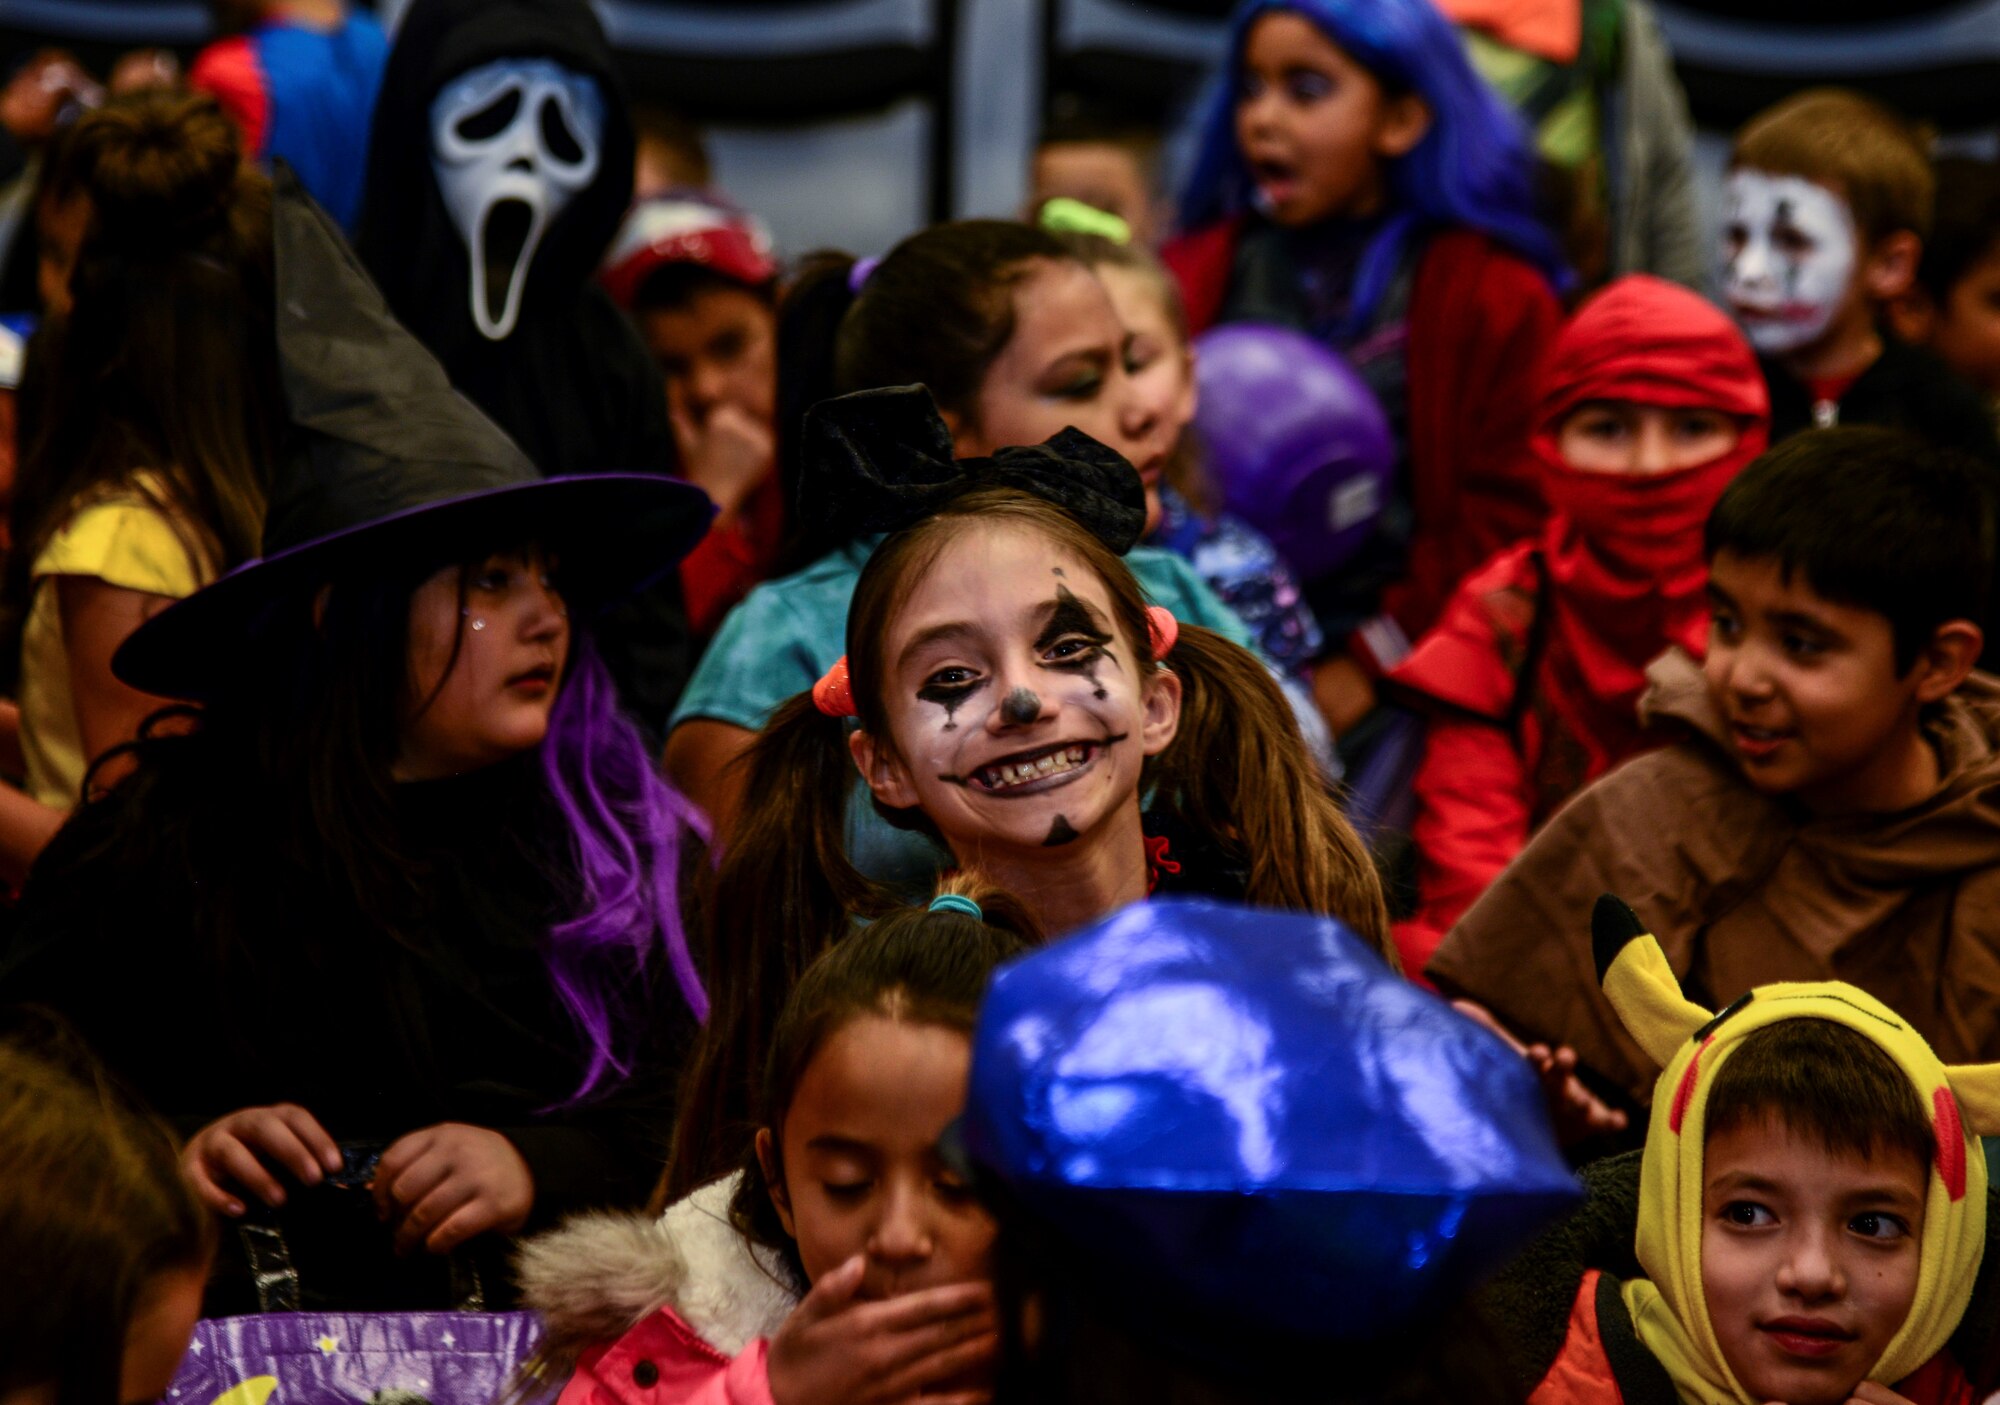 A Kirtland Elementary School student poses for a photo during a trick-or-treat event on Kirtland Air Force Base, N.M., Oct. 31, 2019. Each year, SMC invites the school to their Haunted Halloween event in which the entire building is filled with spooky decorations and hundreds of pounds of candy are passed out to costumed visitors.